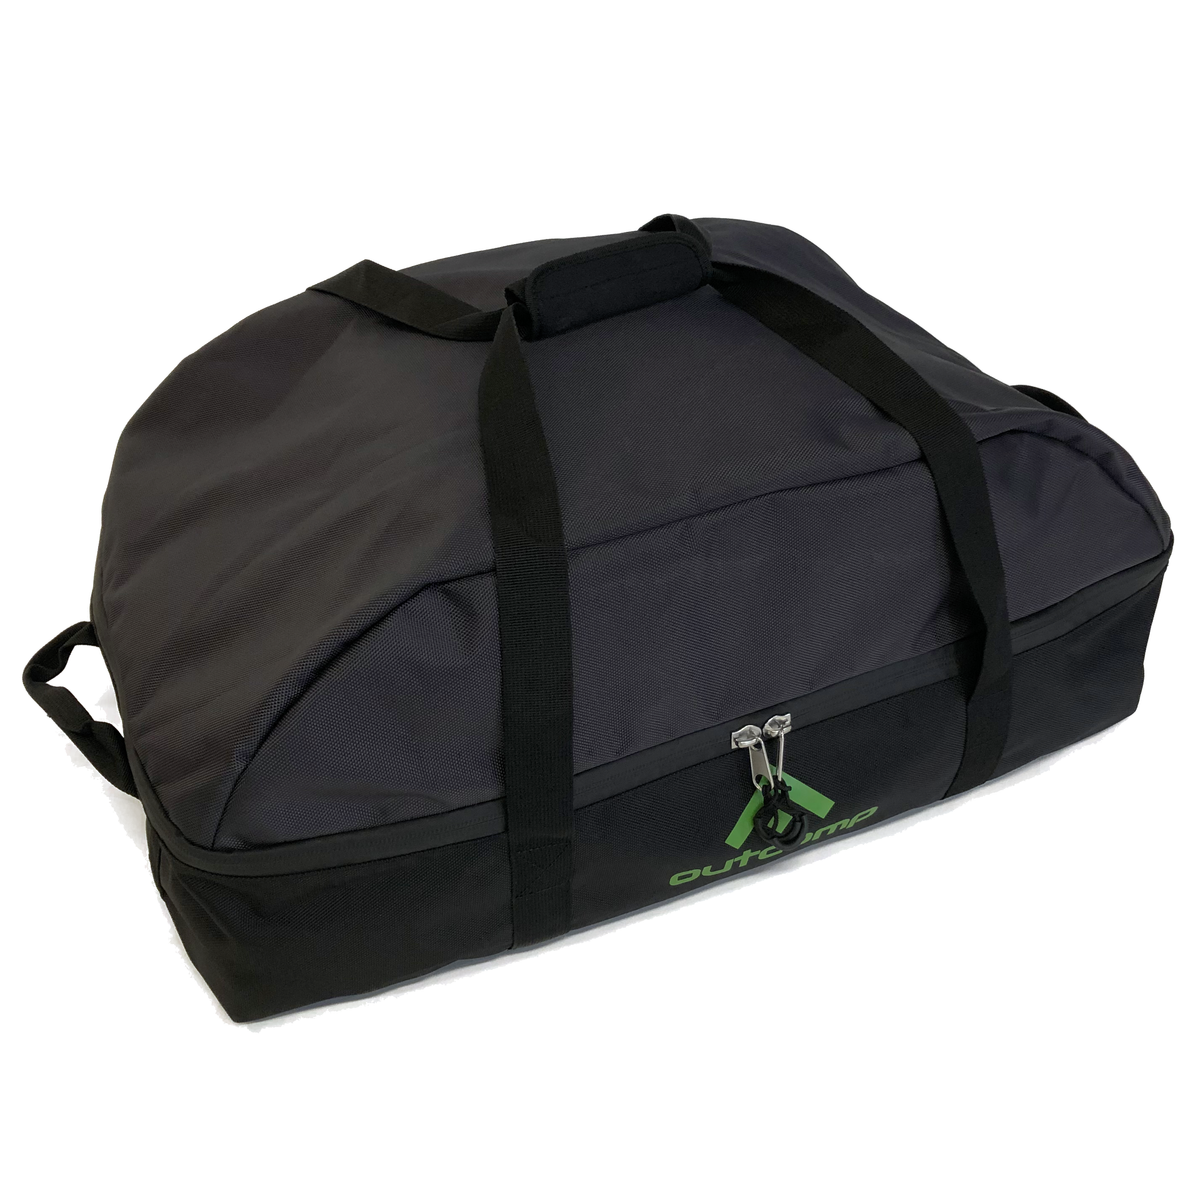 Weber Q1000 series carry bag by Outcamp